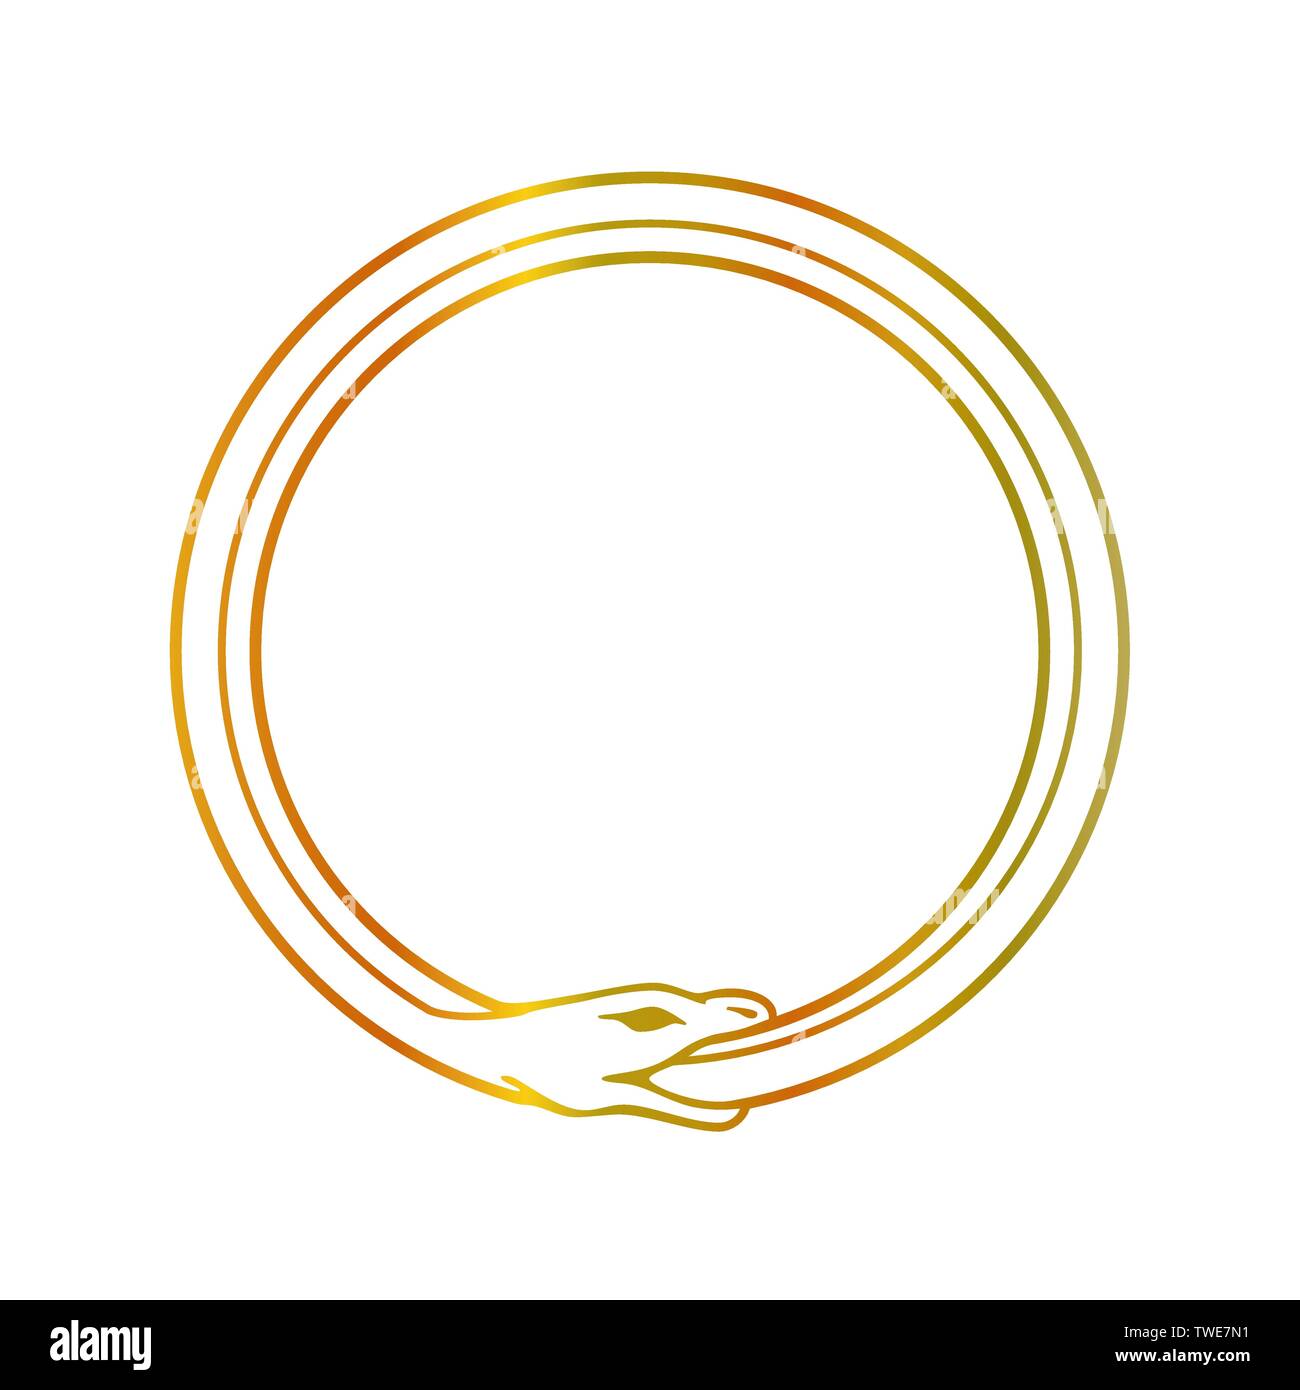 The symbol of Ouroboros snake- The self ingesting snake Stock Vector